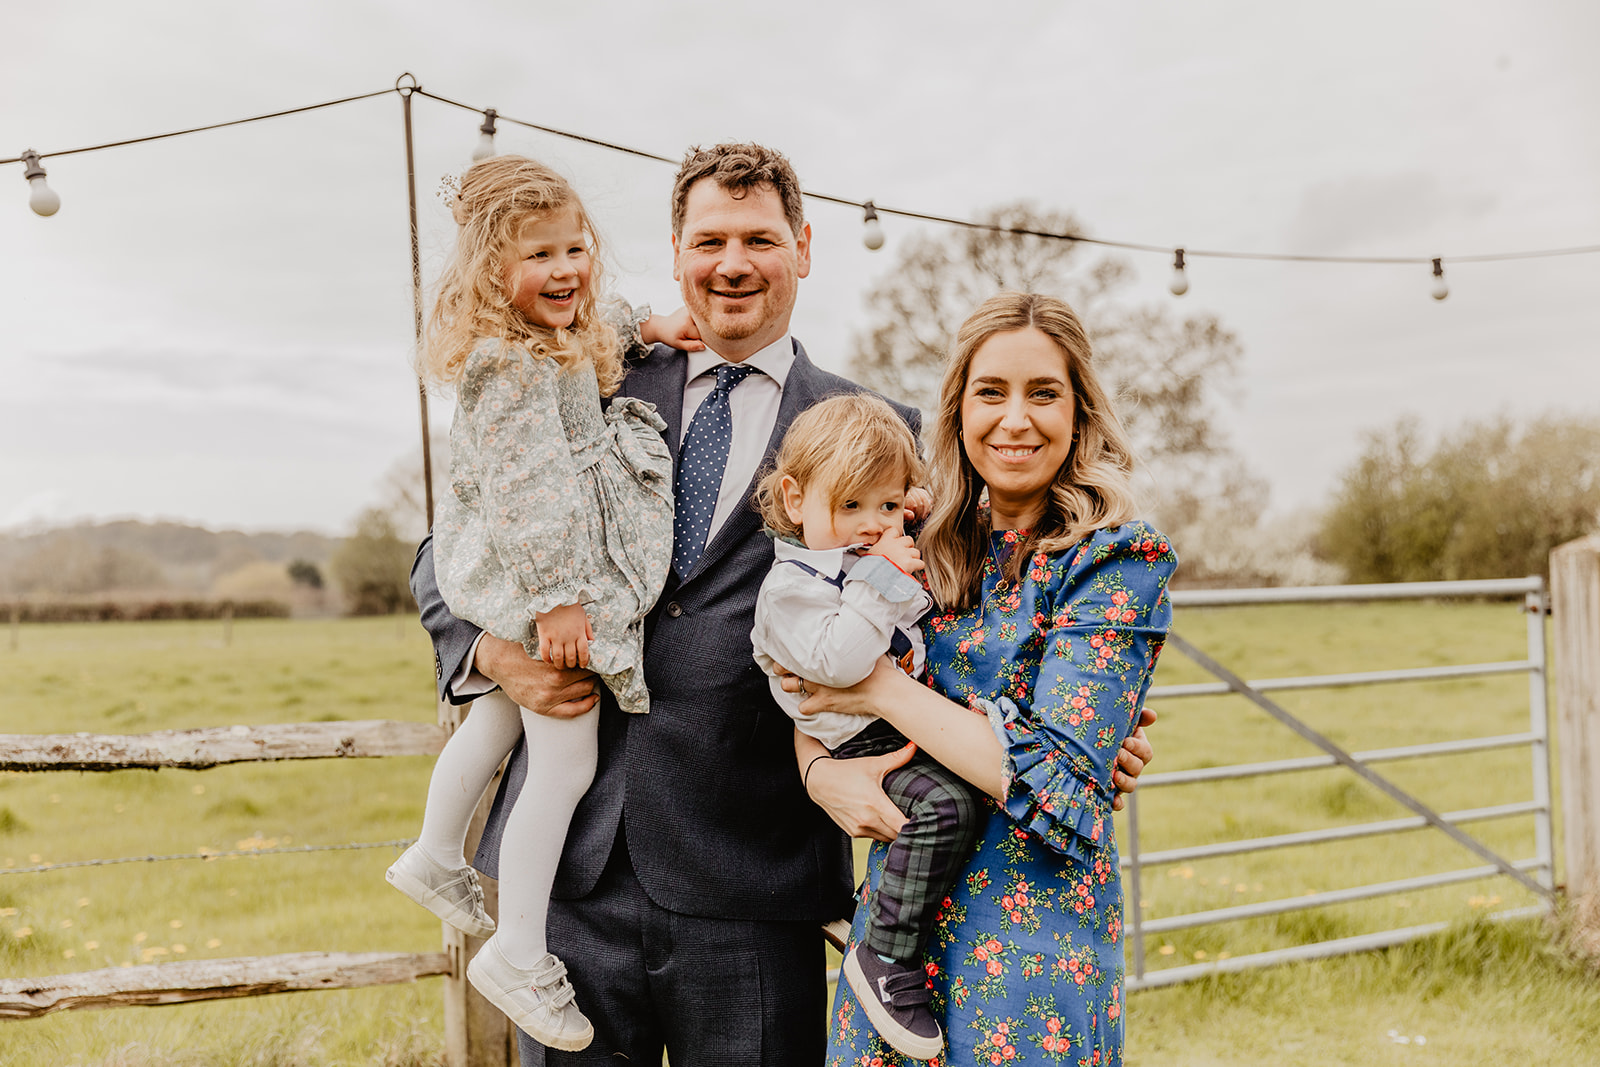 Family photo at a Secret Barn Wedding, West Sussex. By Olive Joy Photography